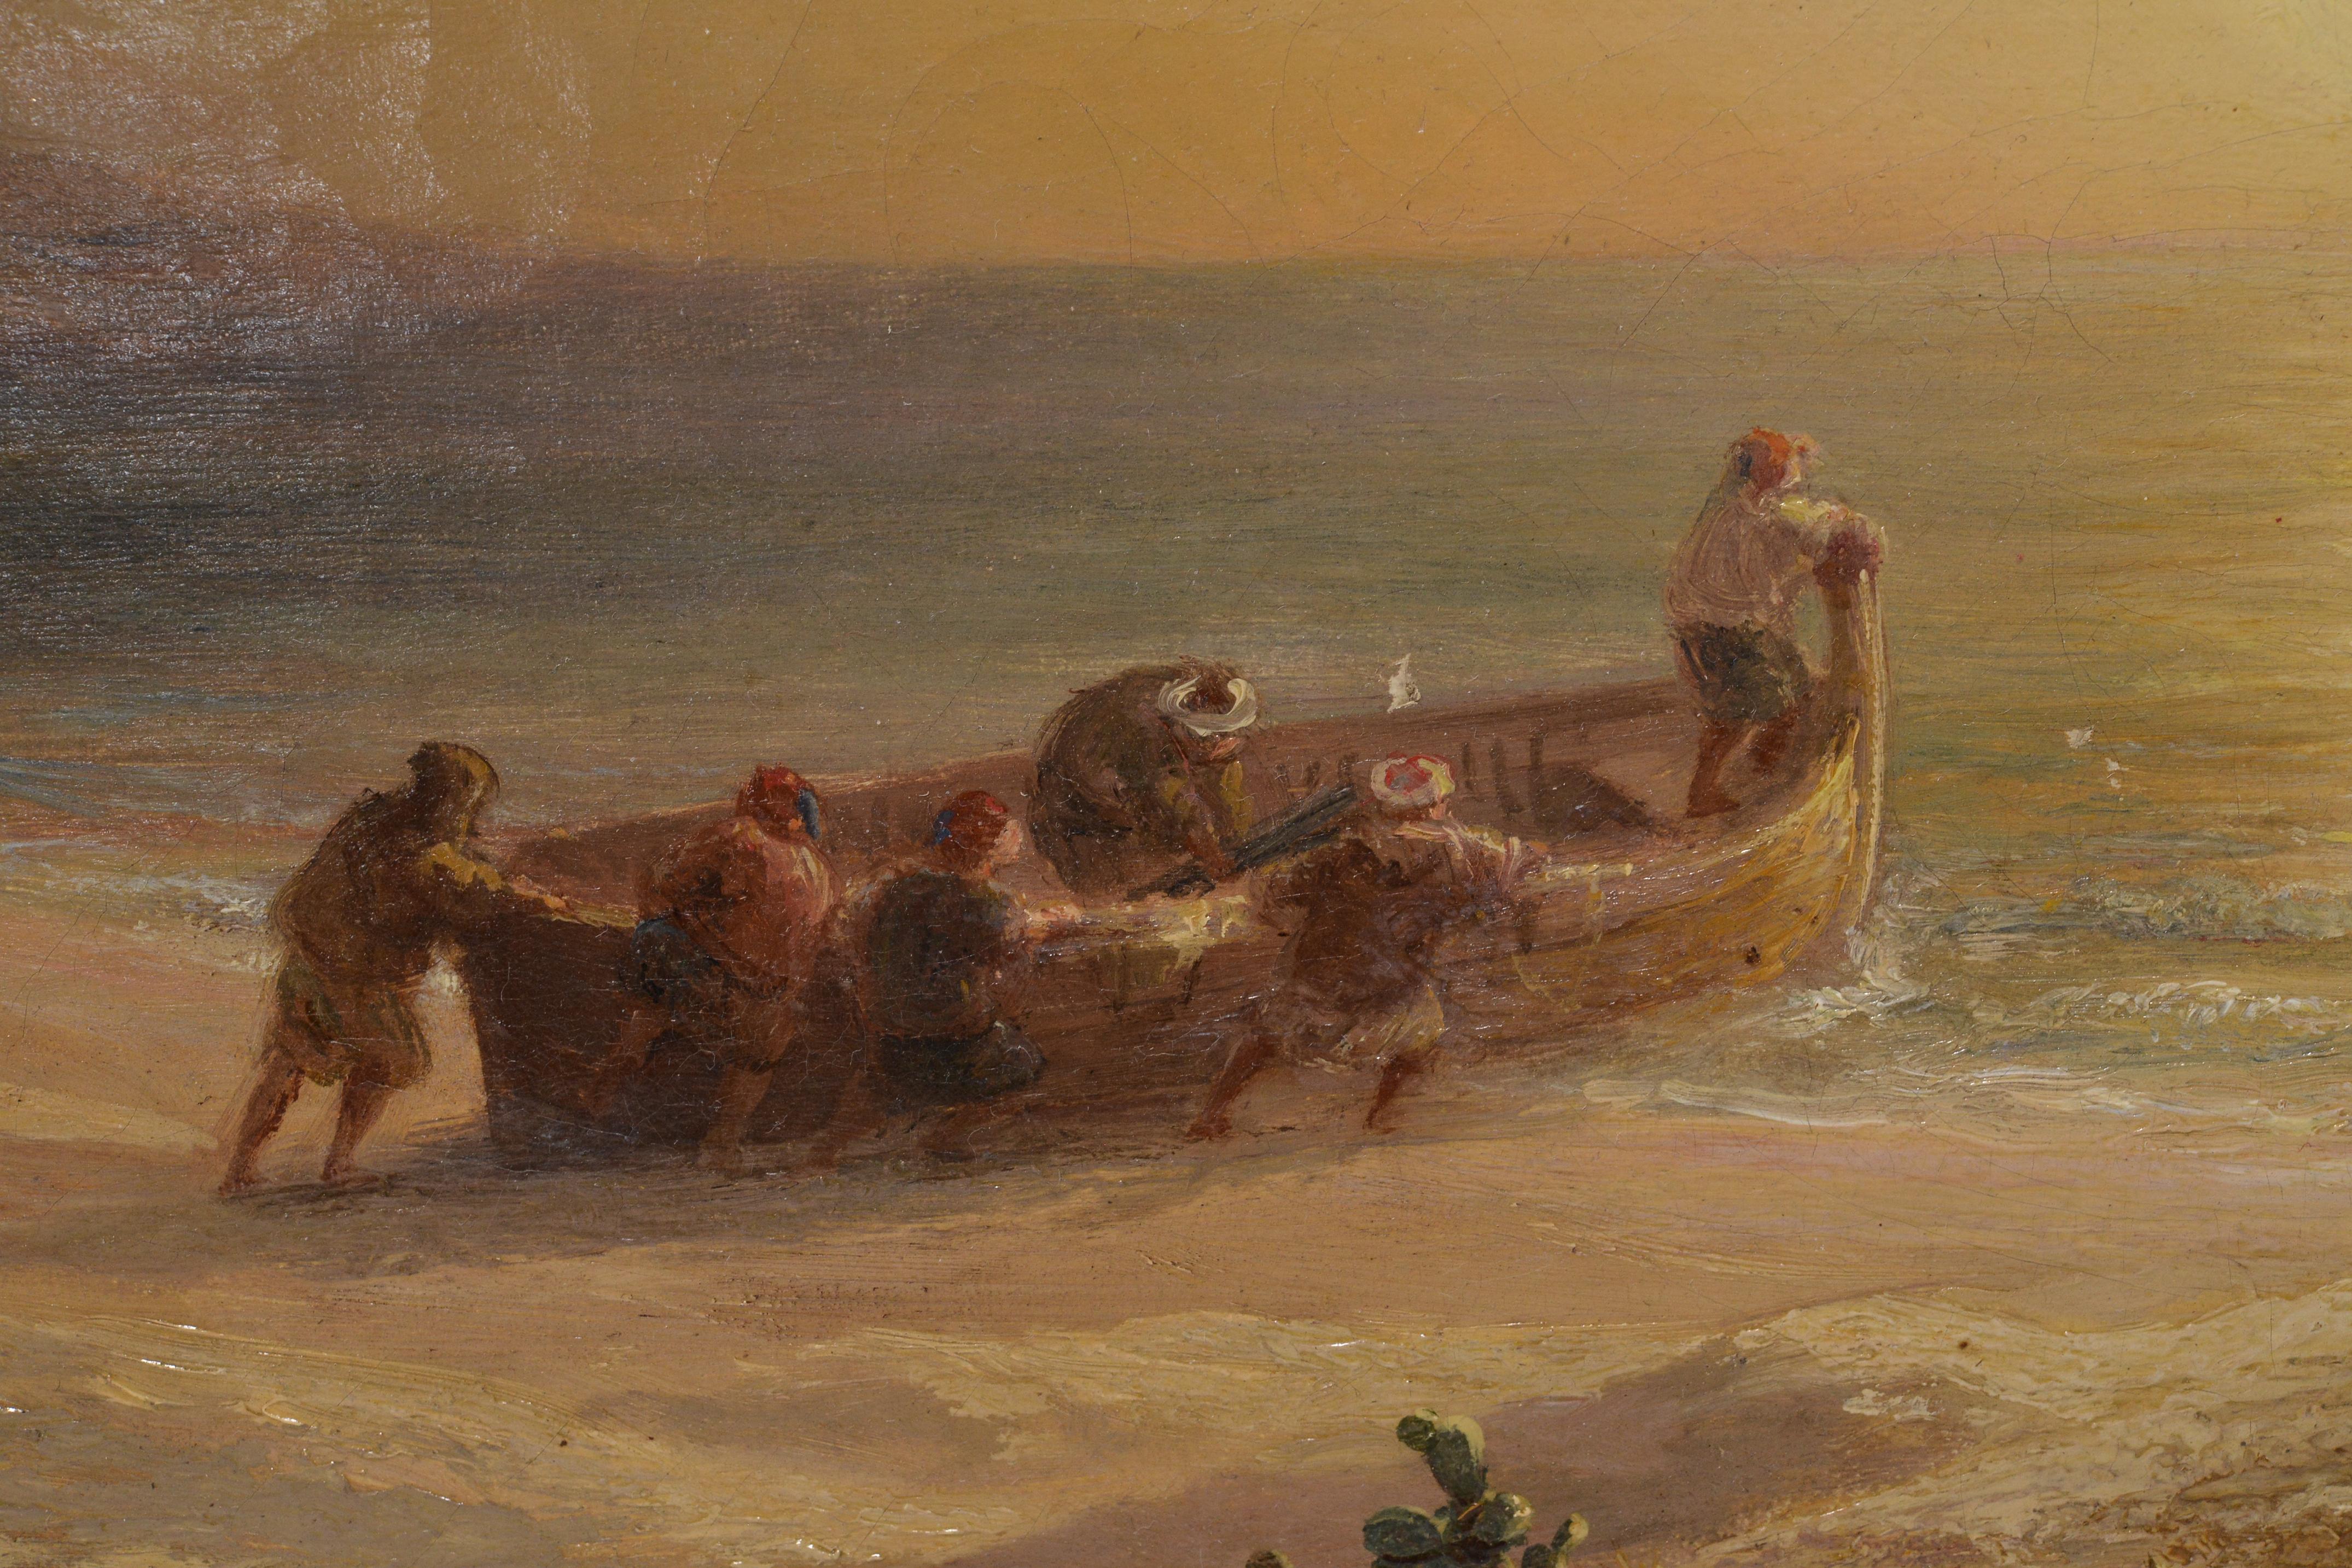 Smugglers at Algerian Coast 1871 Sunset Marine Scene Oil Painting by T. Gudin For Sale 1